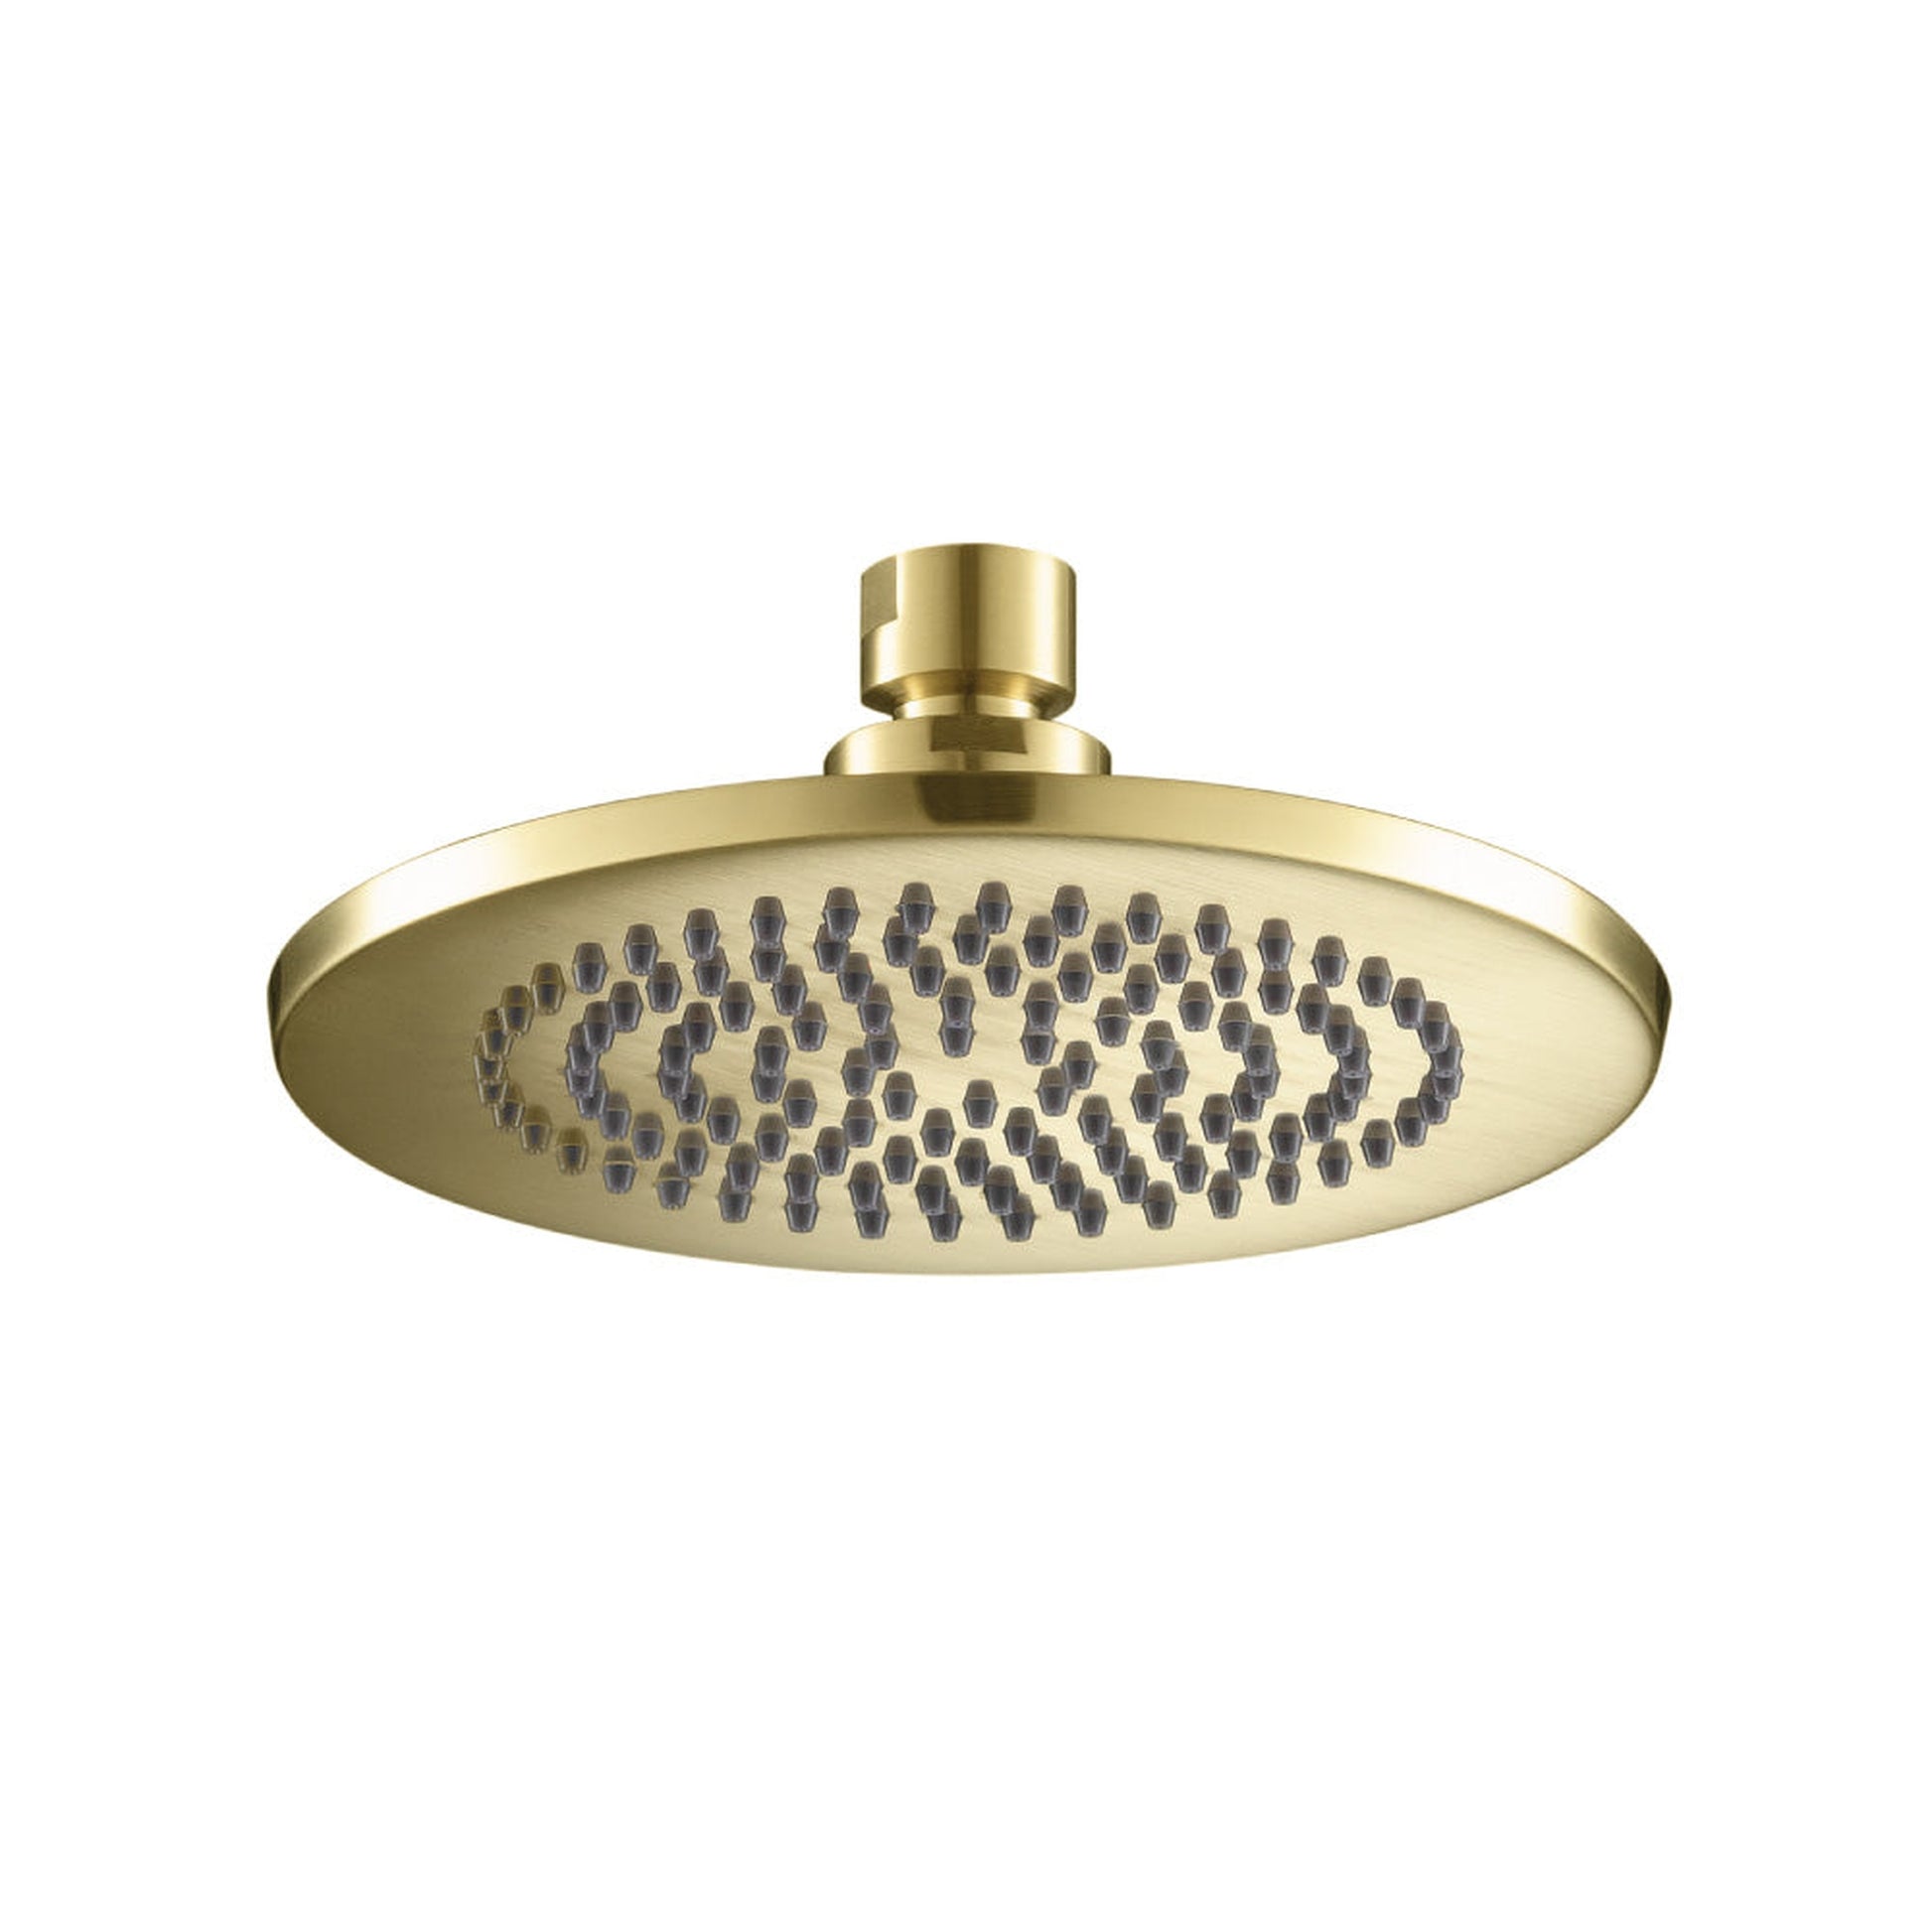 Isenberg Universal Fixtures 6" Single Function Round Satin Brass PVD Solid Brass Rain Shower Head With 7" Wall Mounted Shower Arm